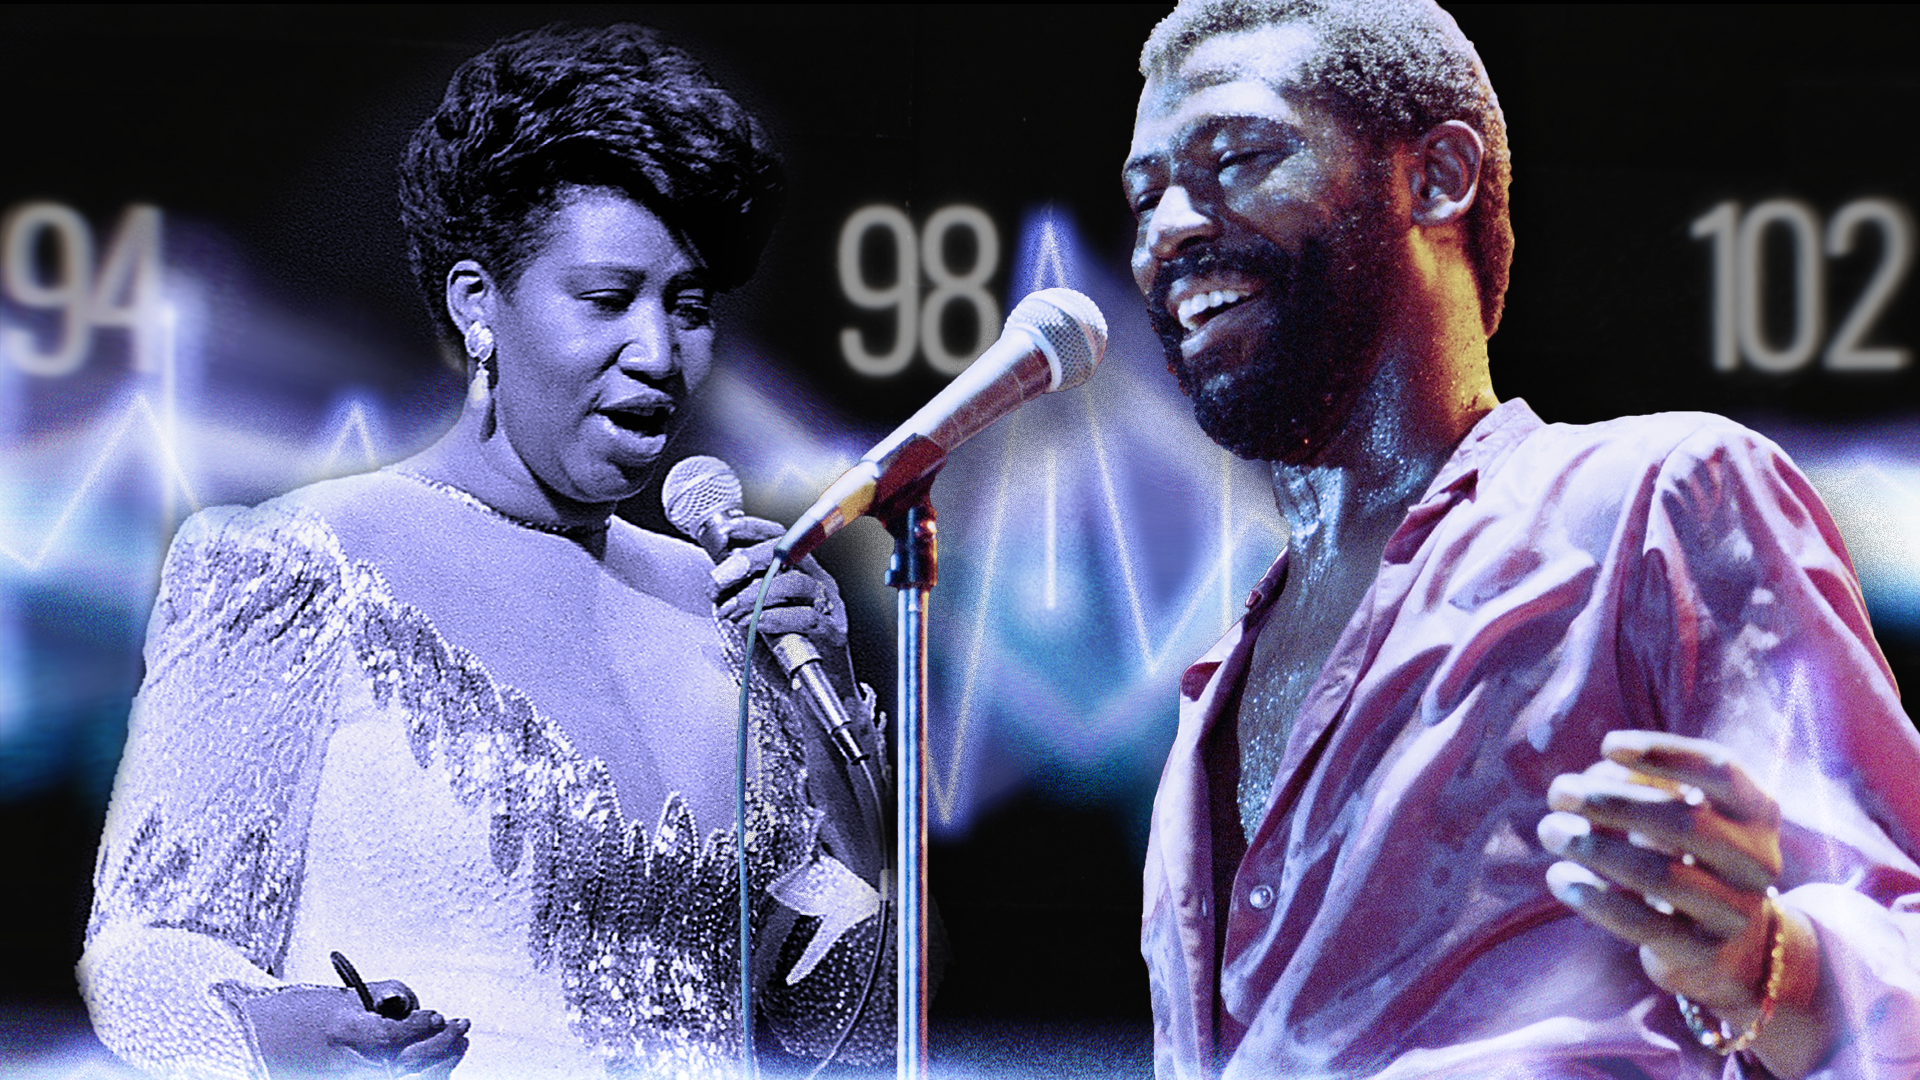 Teddy Pendergrass and Aretha Franklin sing against a glowing radio wave backdrop